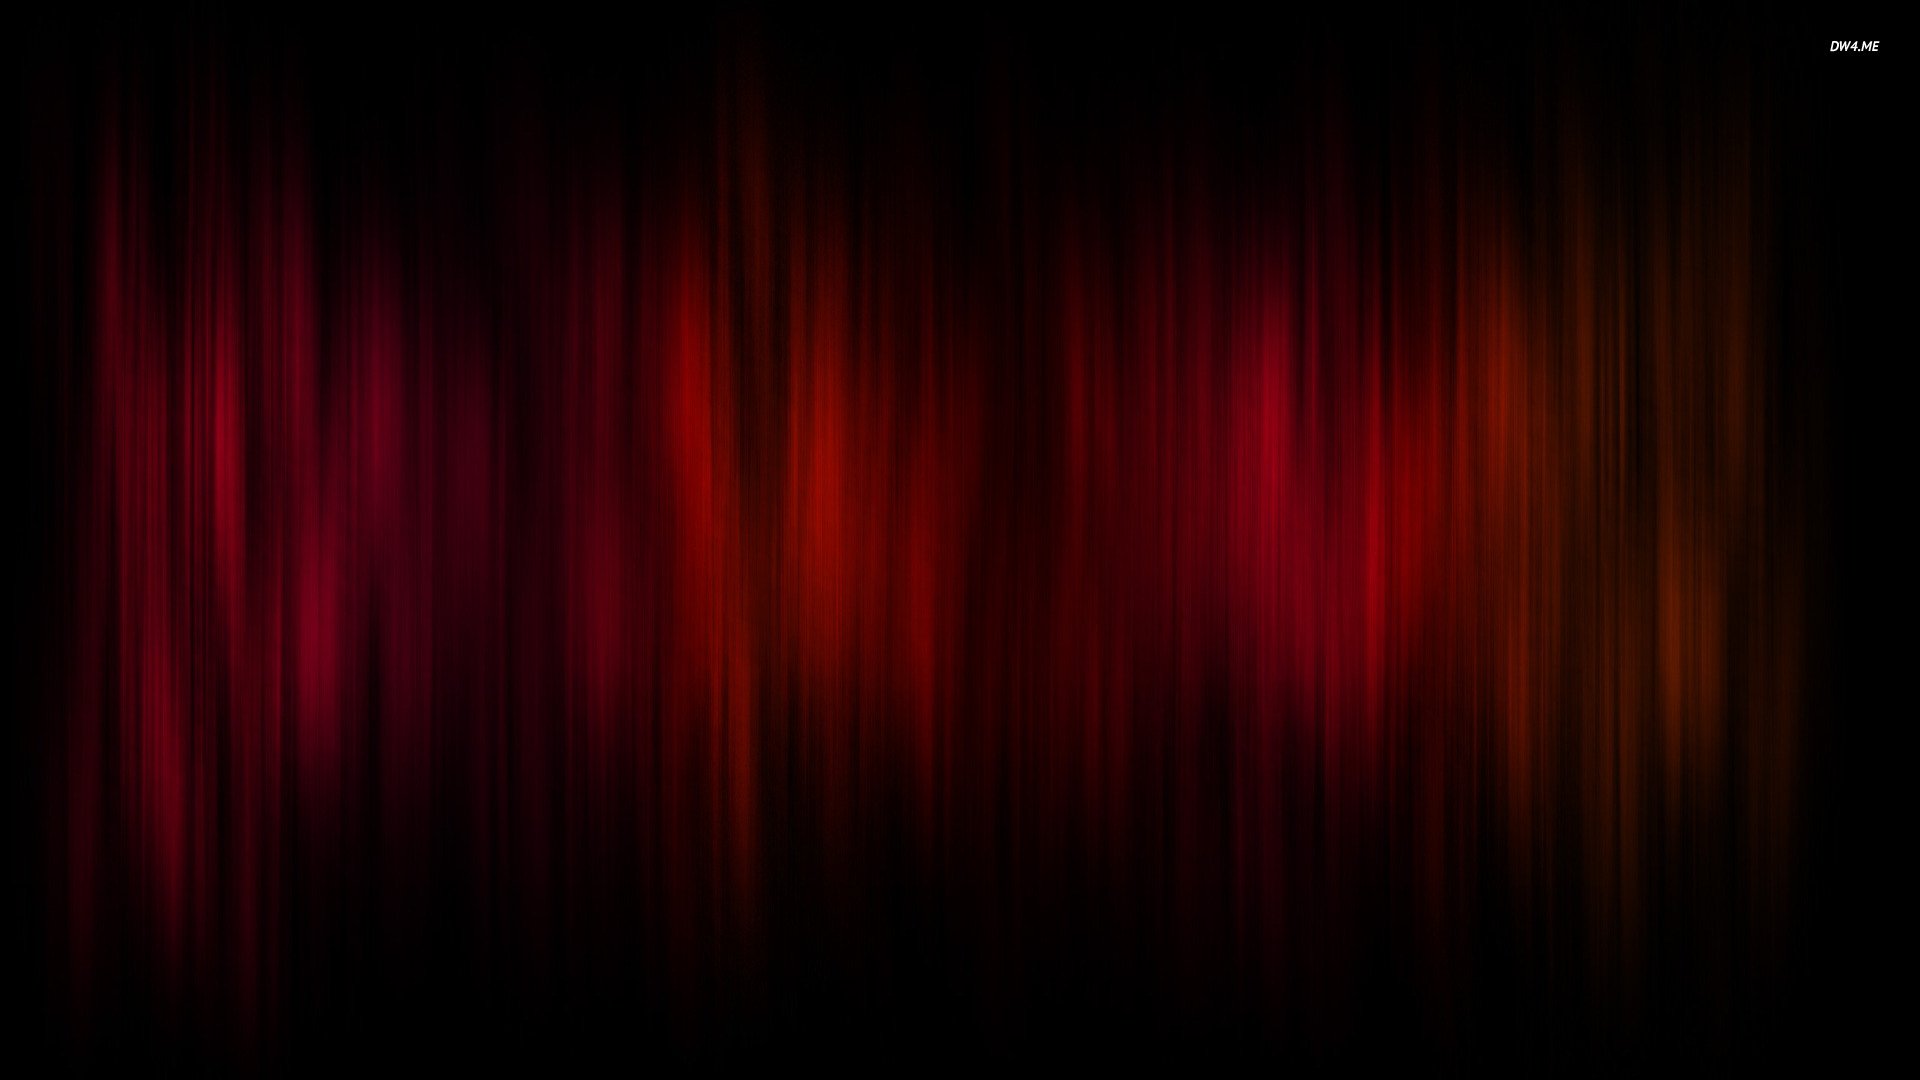 Black and Red Abstract Wallpaper Download 359   Amazing